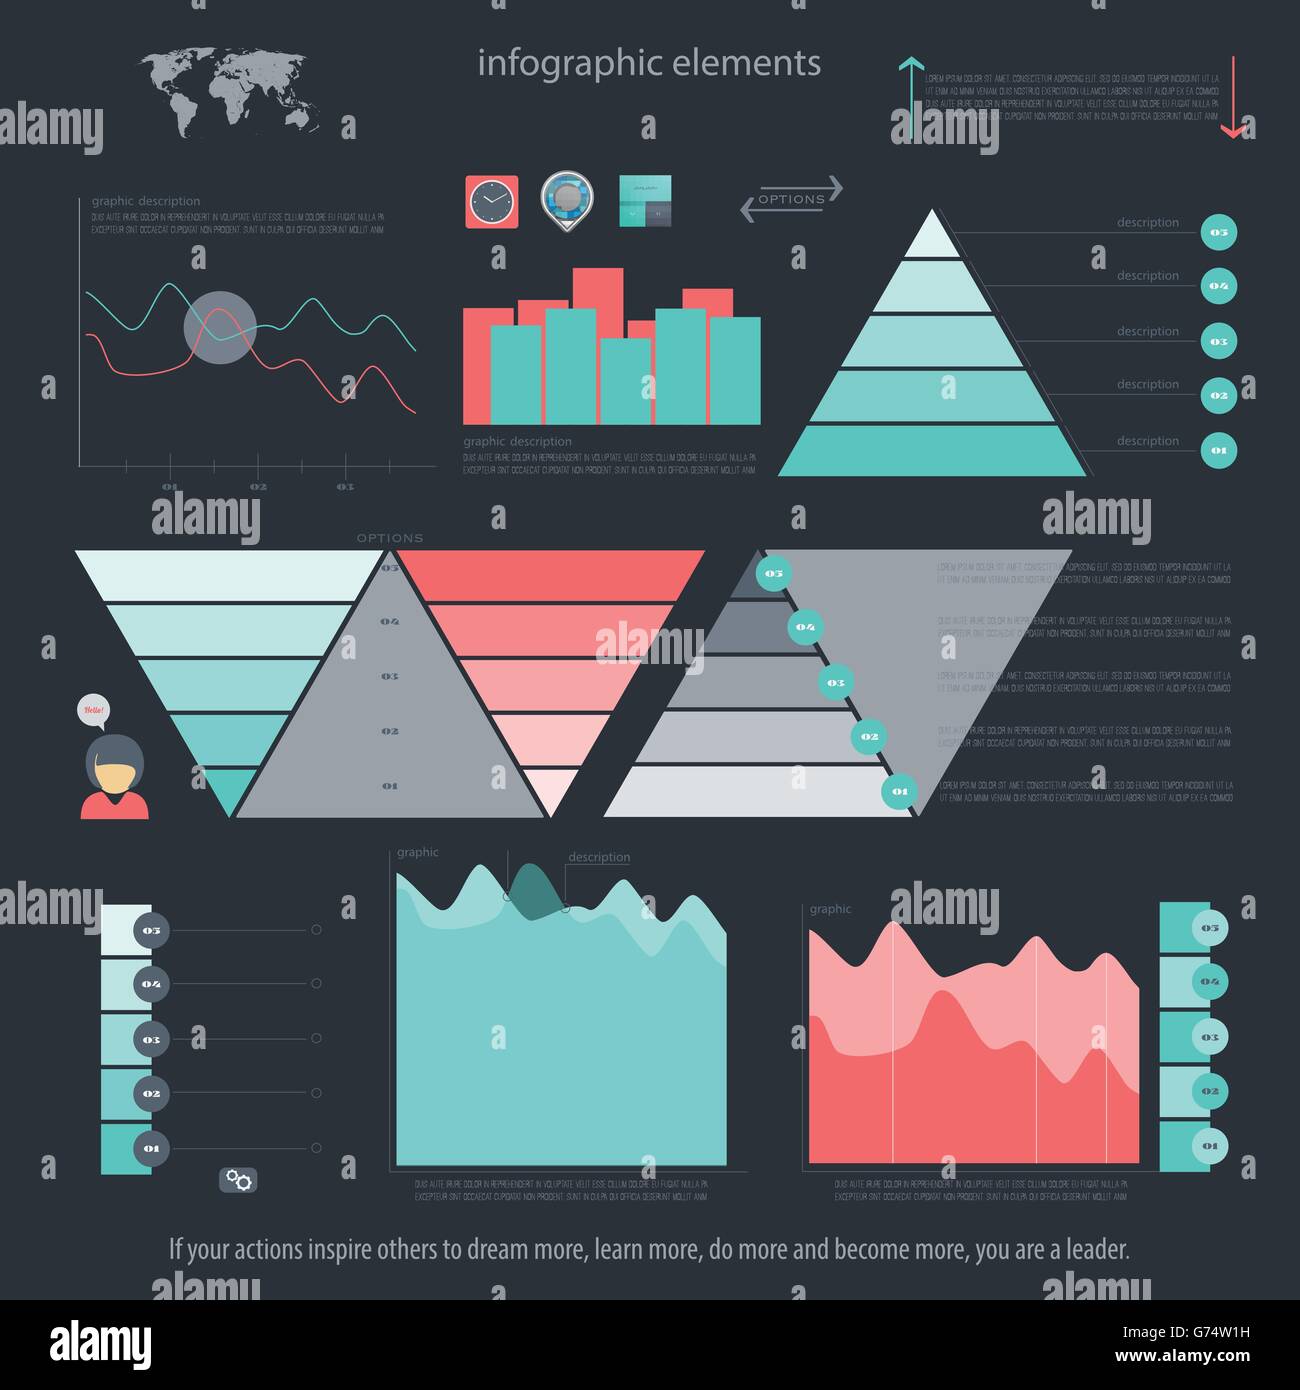 set of infographic elements isolated on dark background. vector timeline and option graph symbol. pyramid info graphic icons wit Stock Vector